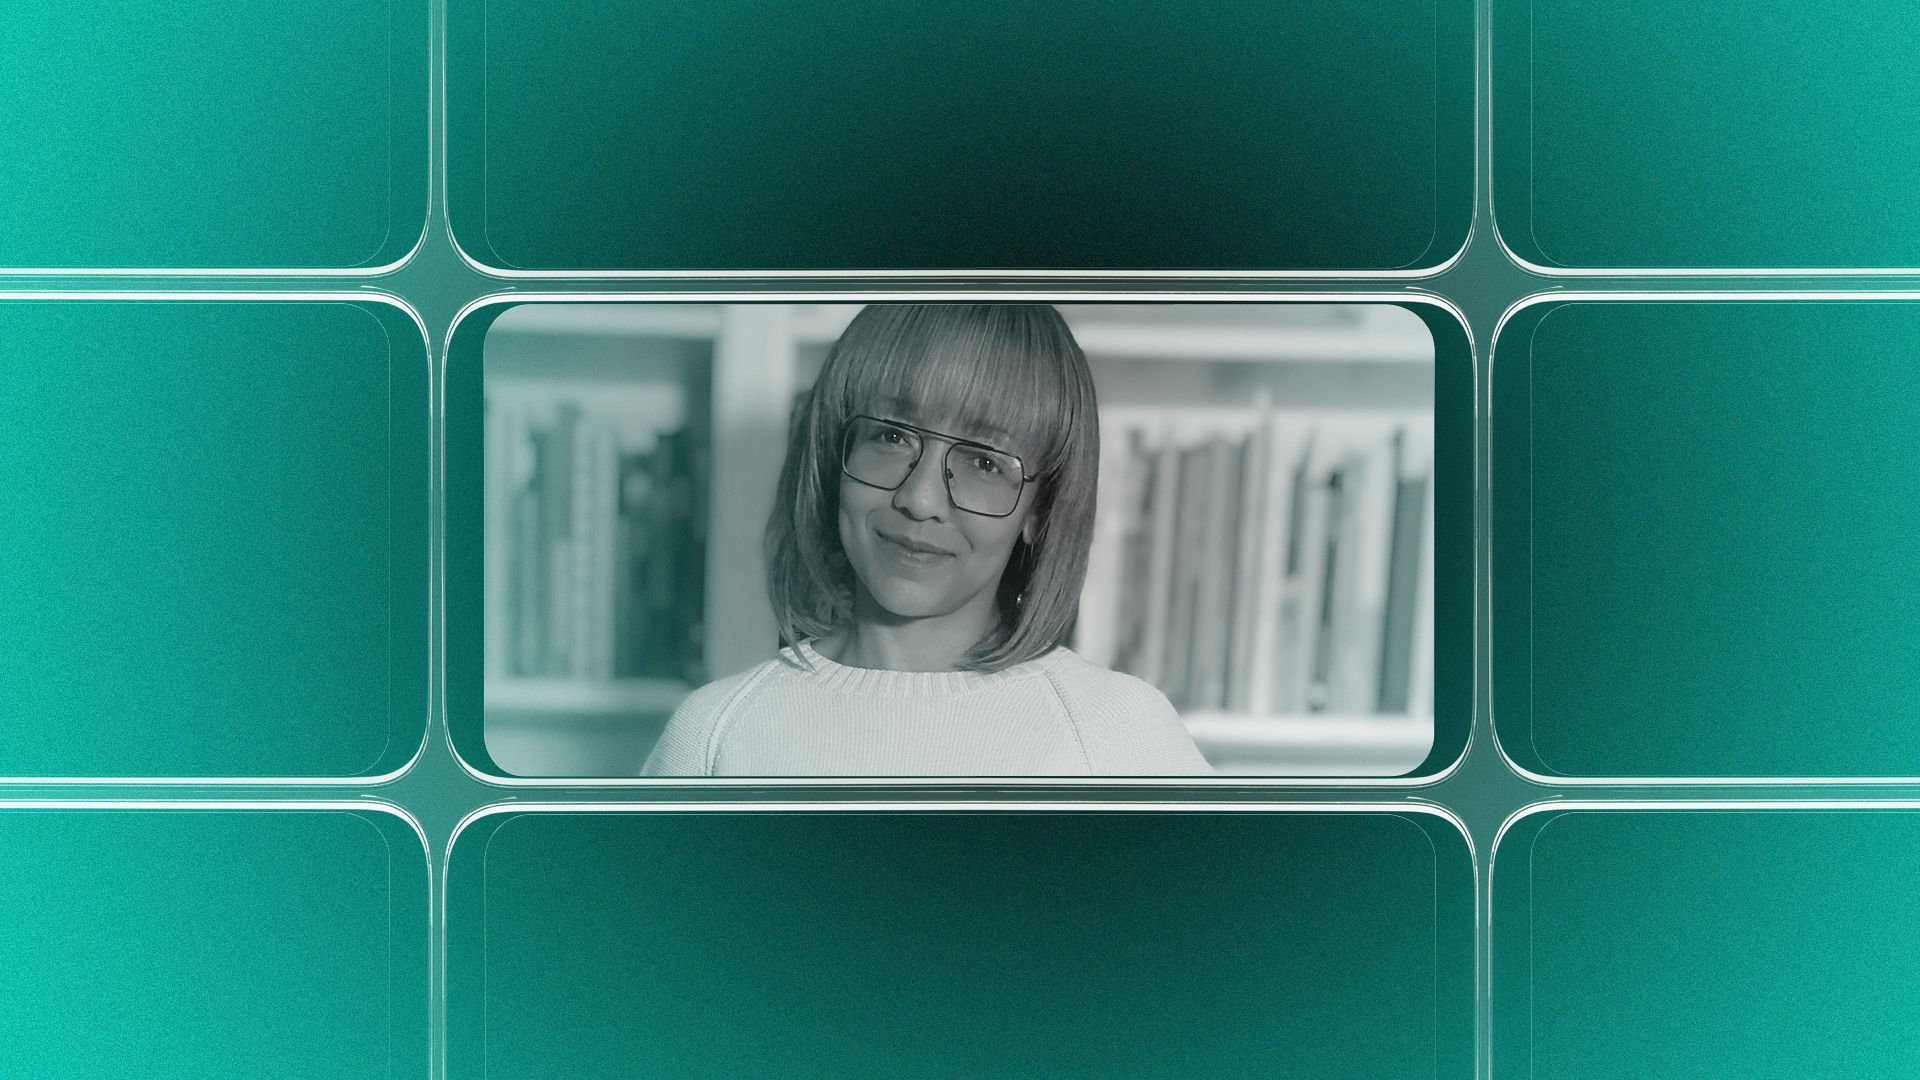 A photo of Karen Comer Lowe wearing glasses in front of book shelves, framed by a smartphone